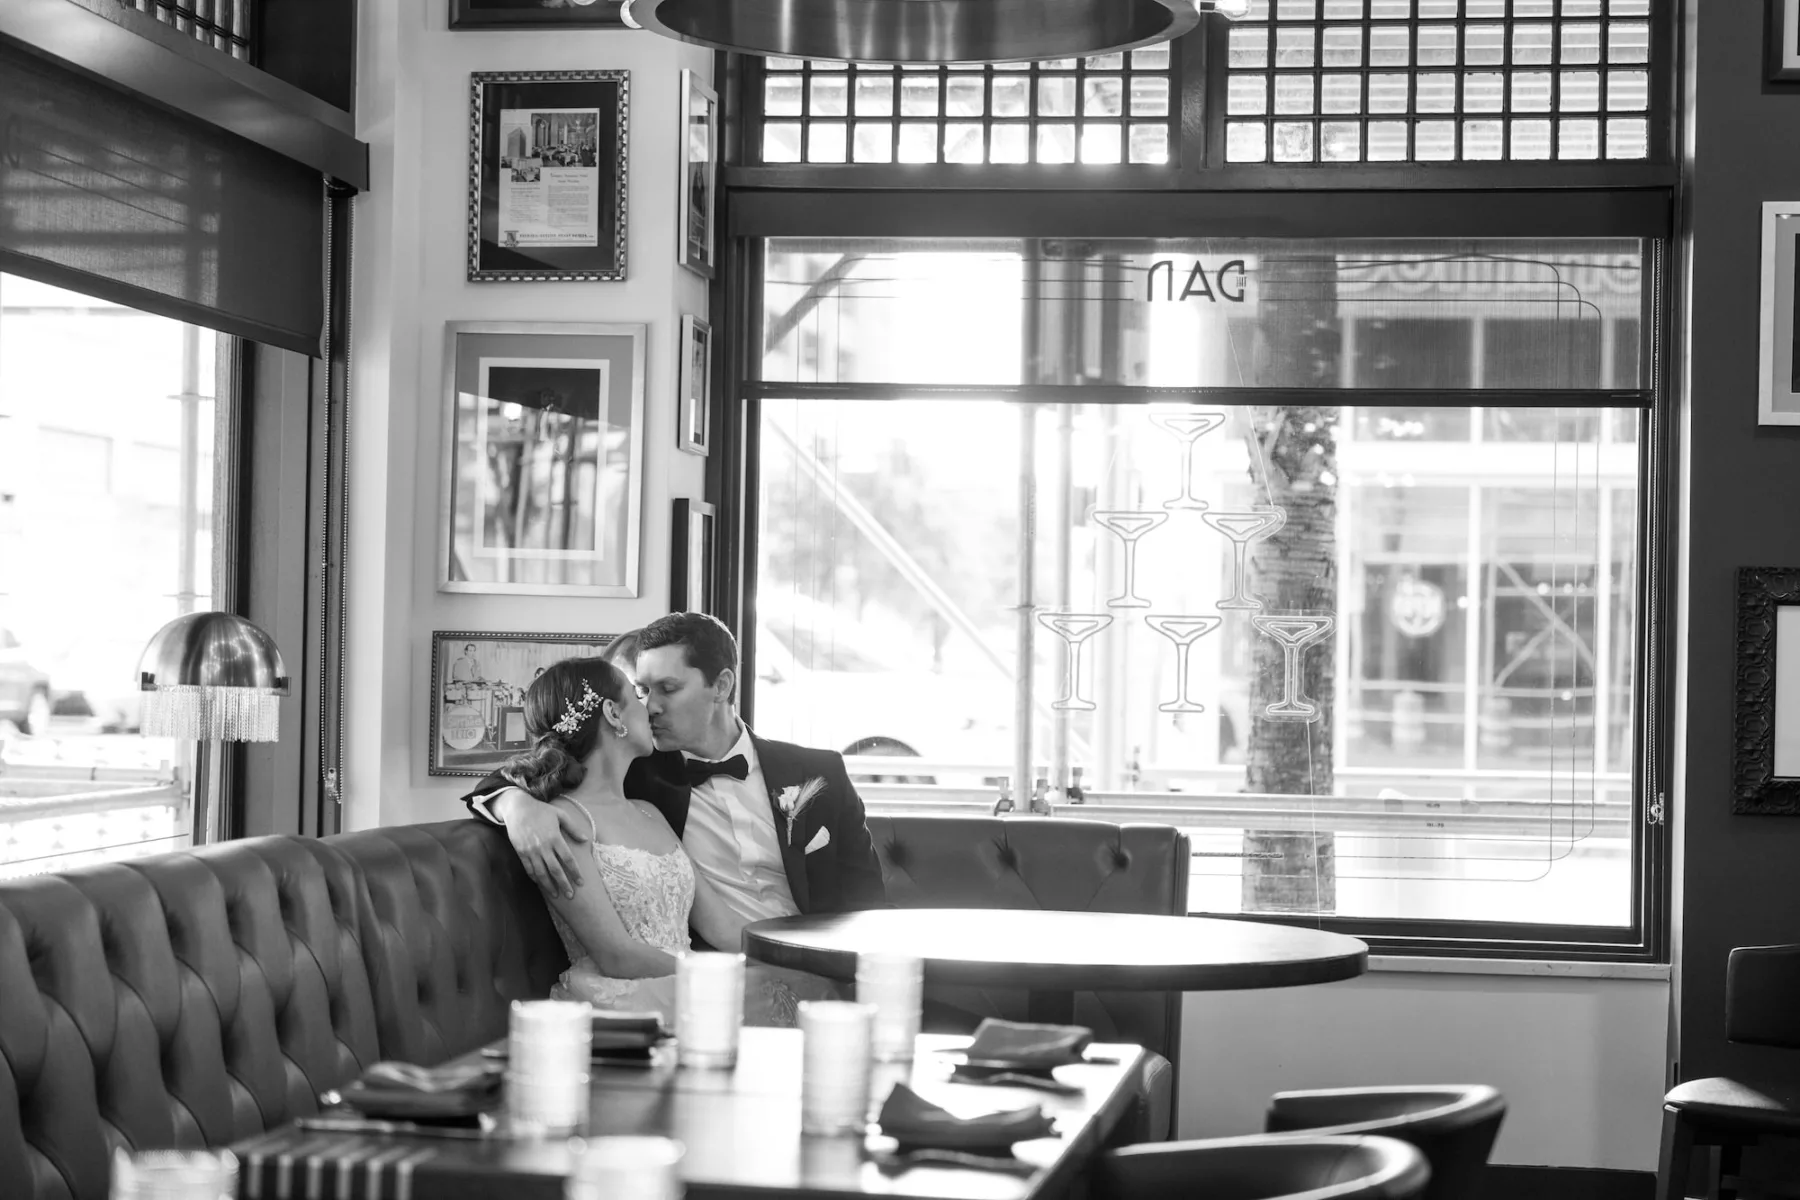 Romantic Bride and Groom Black and White Wedding Portrait | Roaring Twenties Inspired The Dan Bar | Tampa Bay Event Venue Hotel Flor | Photographer Eddy Almaguer Photography